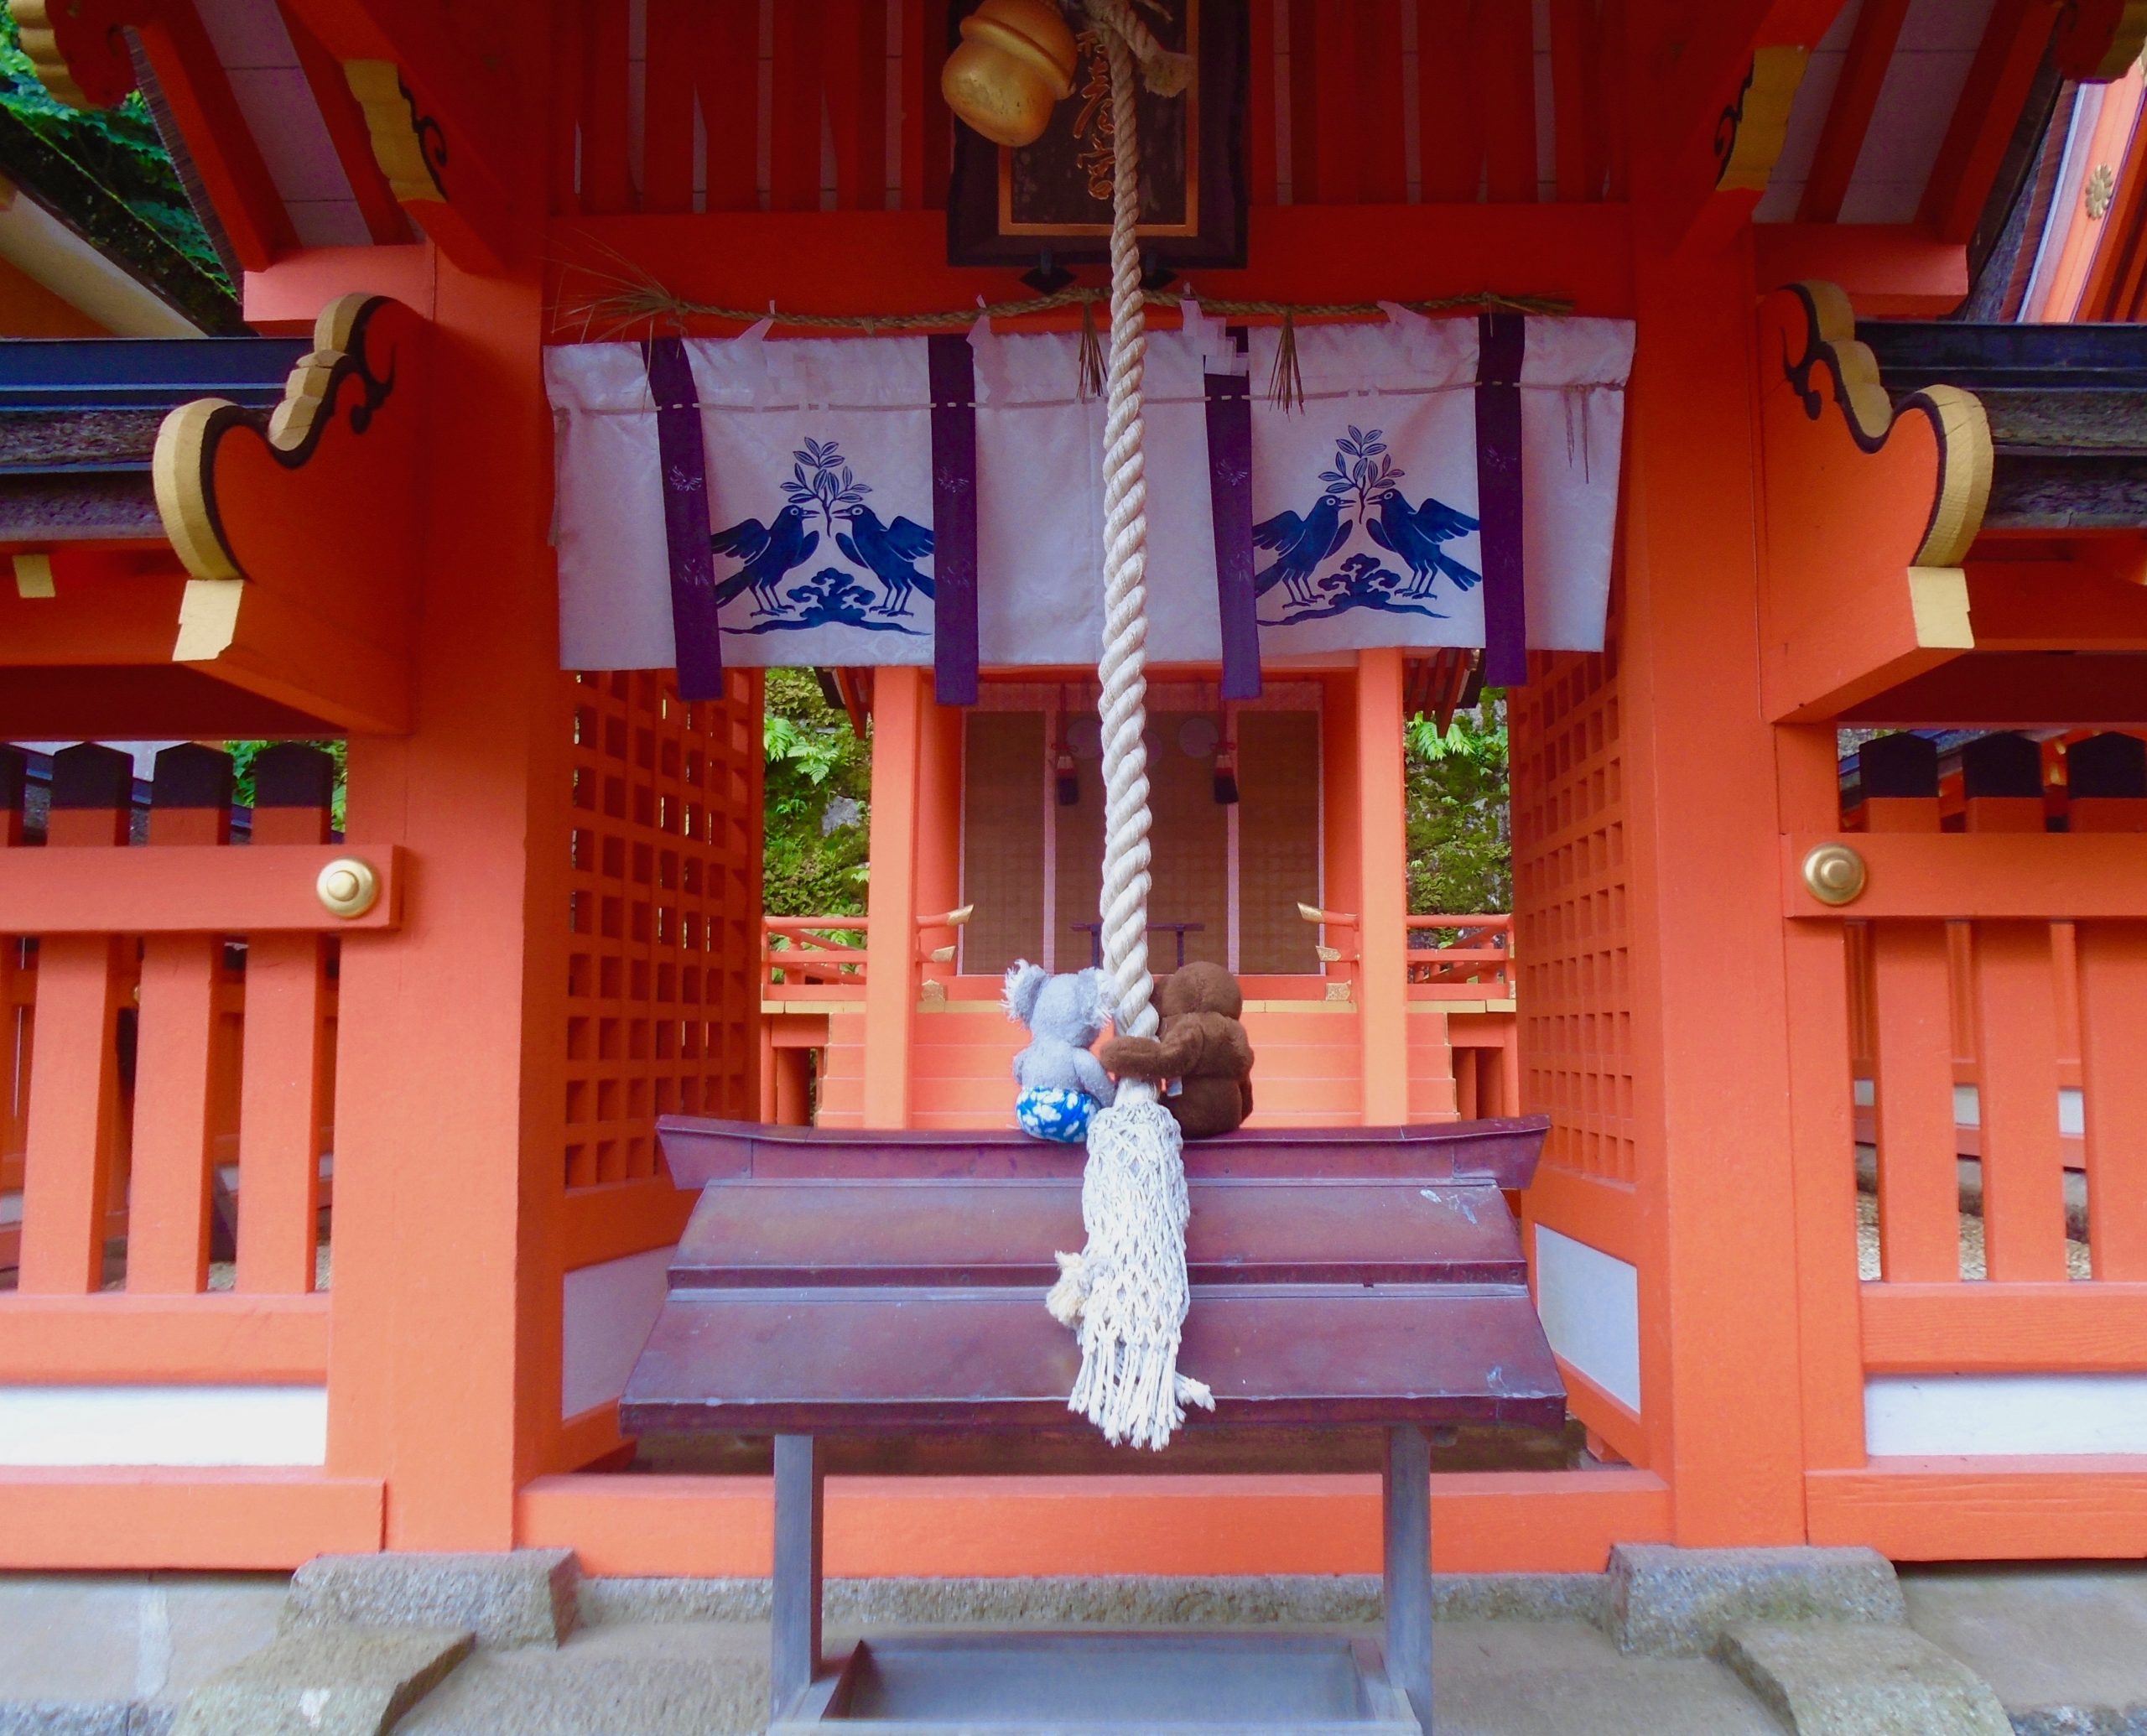 An image of a shrine to visit for Year-end greetings